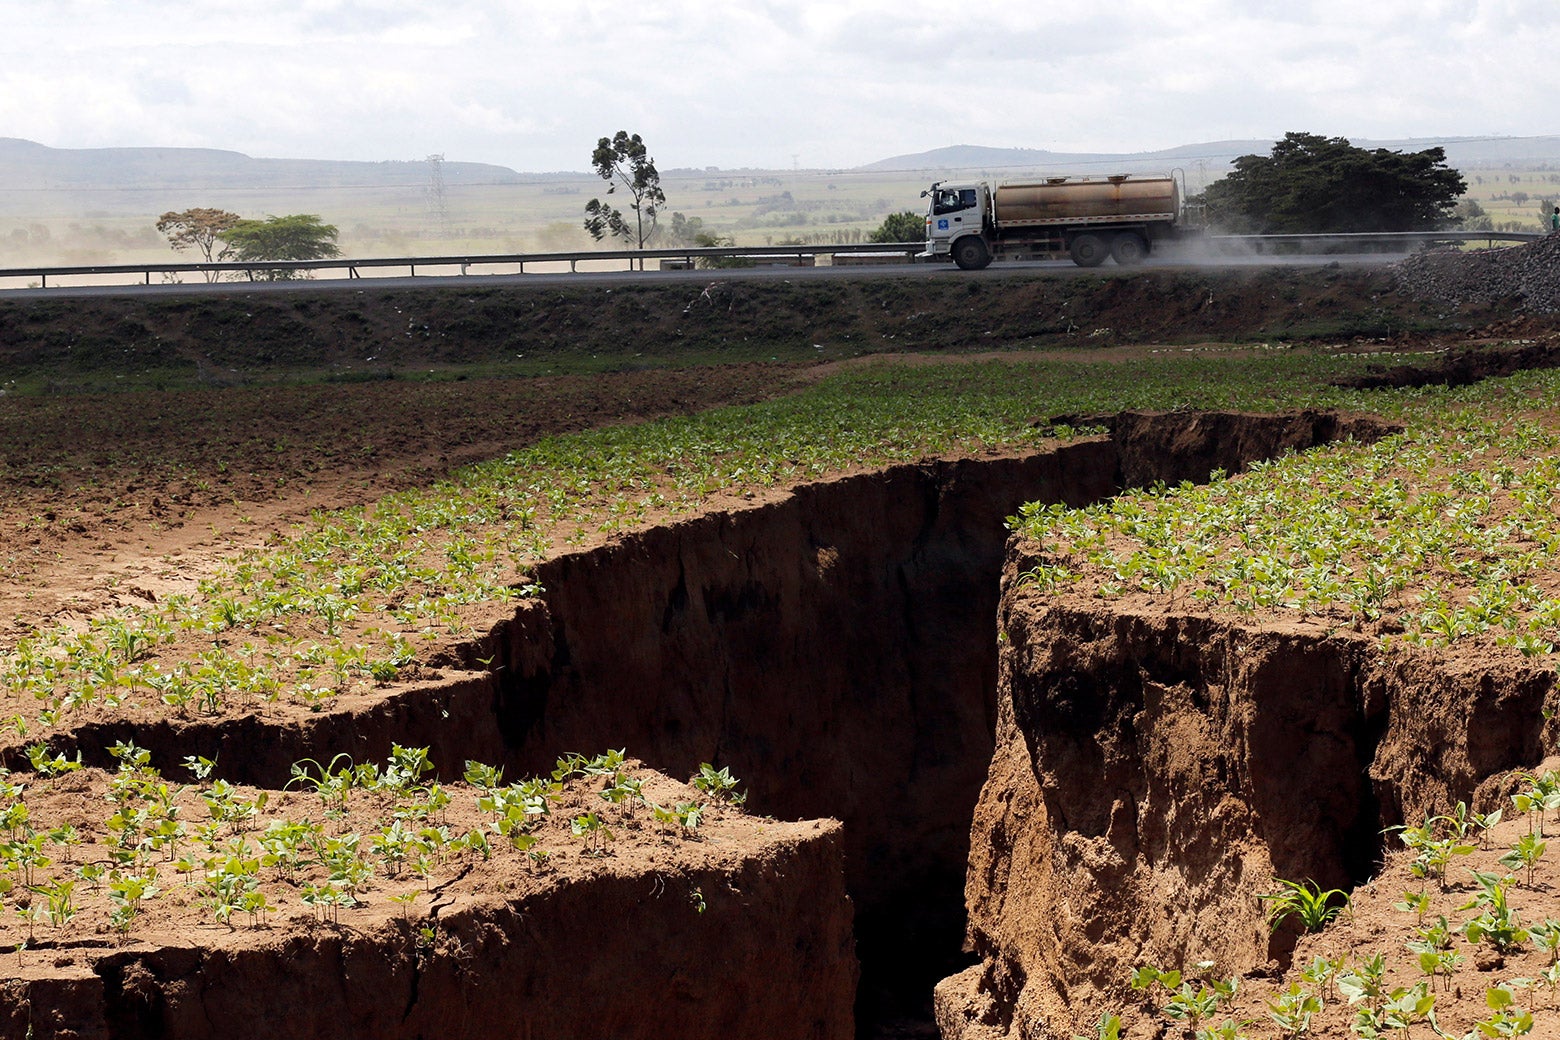 A tanker drives near a chasm suspected to have been caused by a heavy downpour along an underground fault line near the Rift Valley town of Mai-Mahiu, Kenya on 28, 2018.